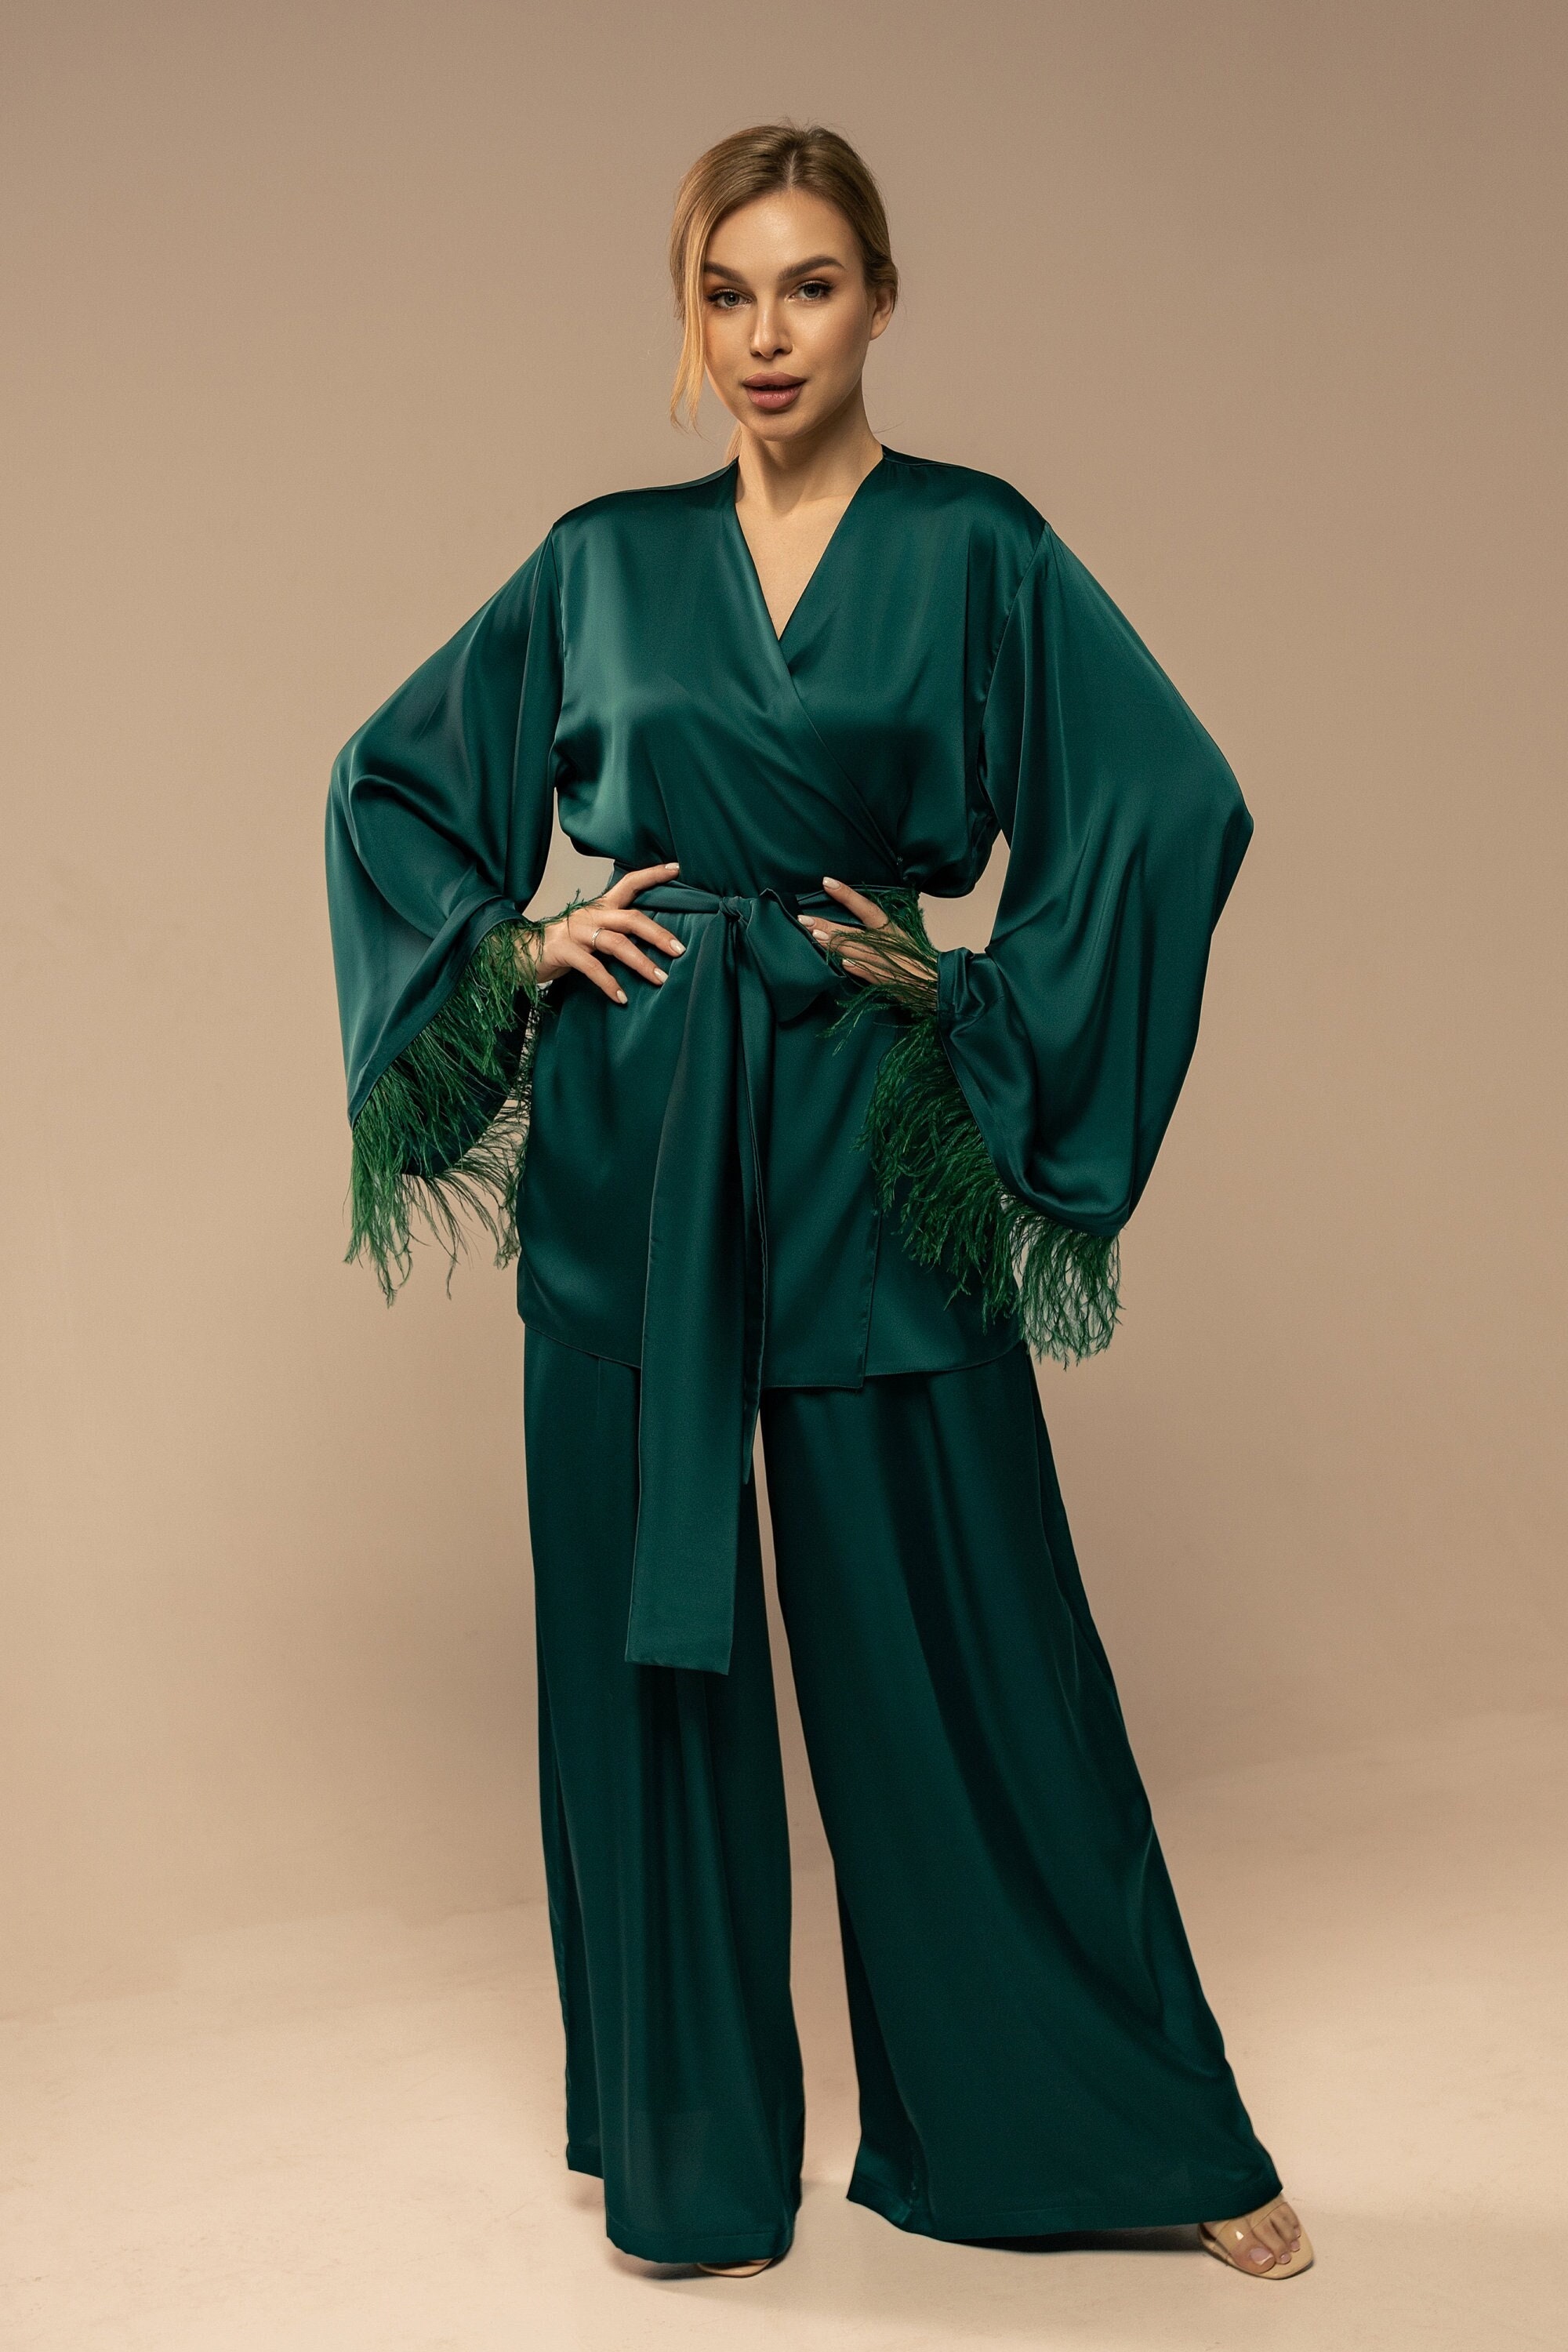 Dark Emerald Green Silk Pant Suit for Women Silk Two Piece - Etsy